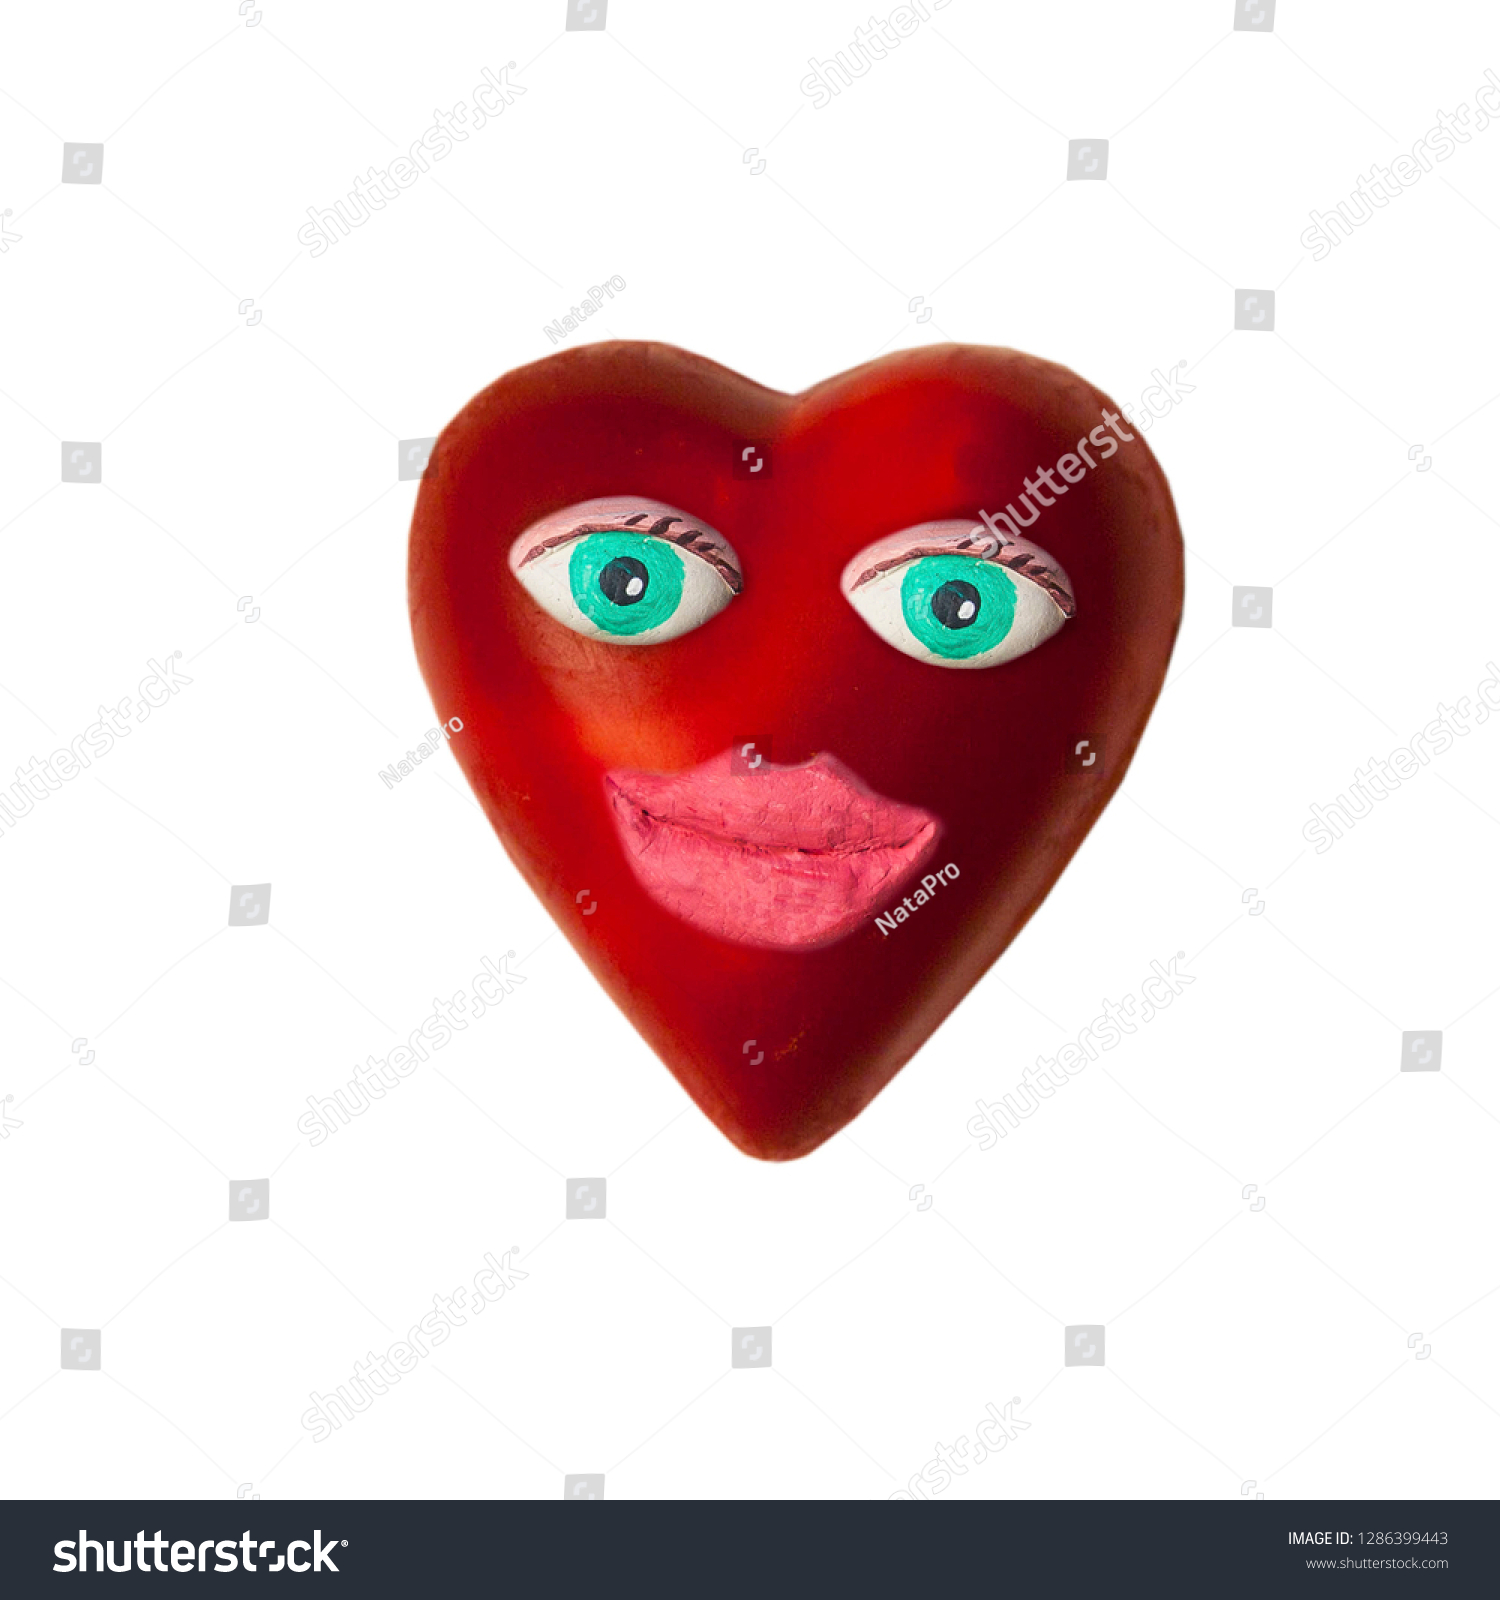 Cartoon heart with eyes and lips. On Valentine's day #1286399443